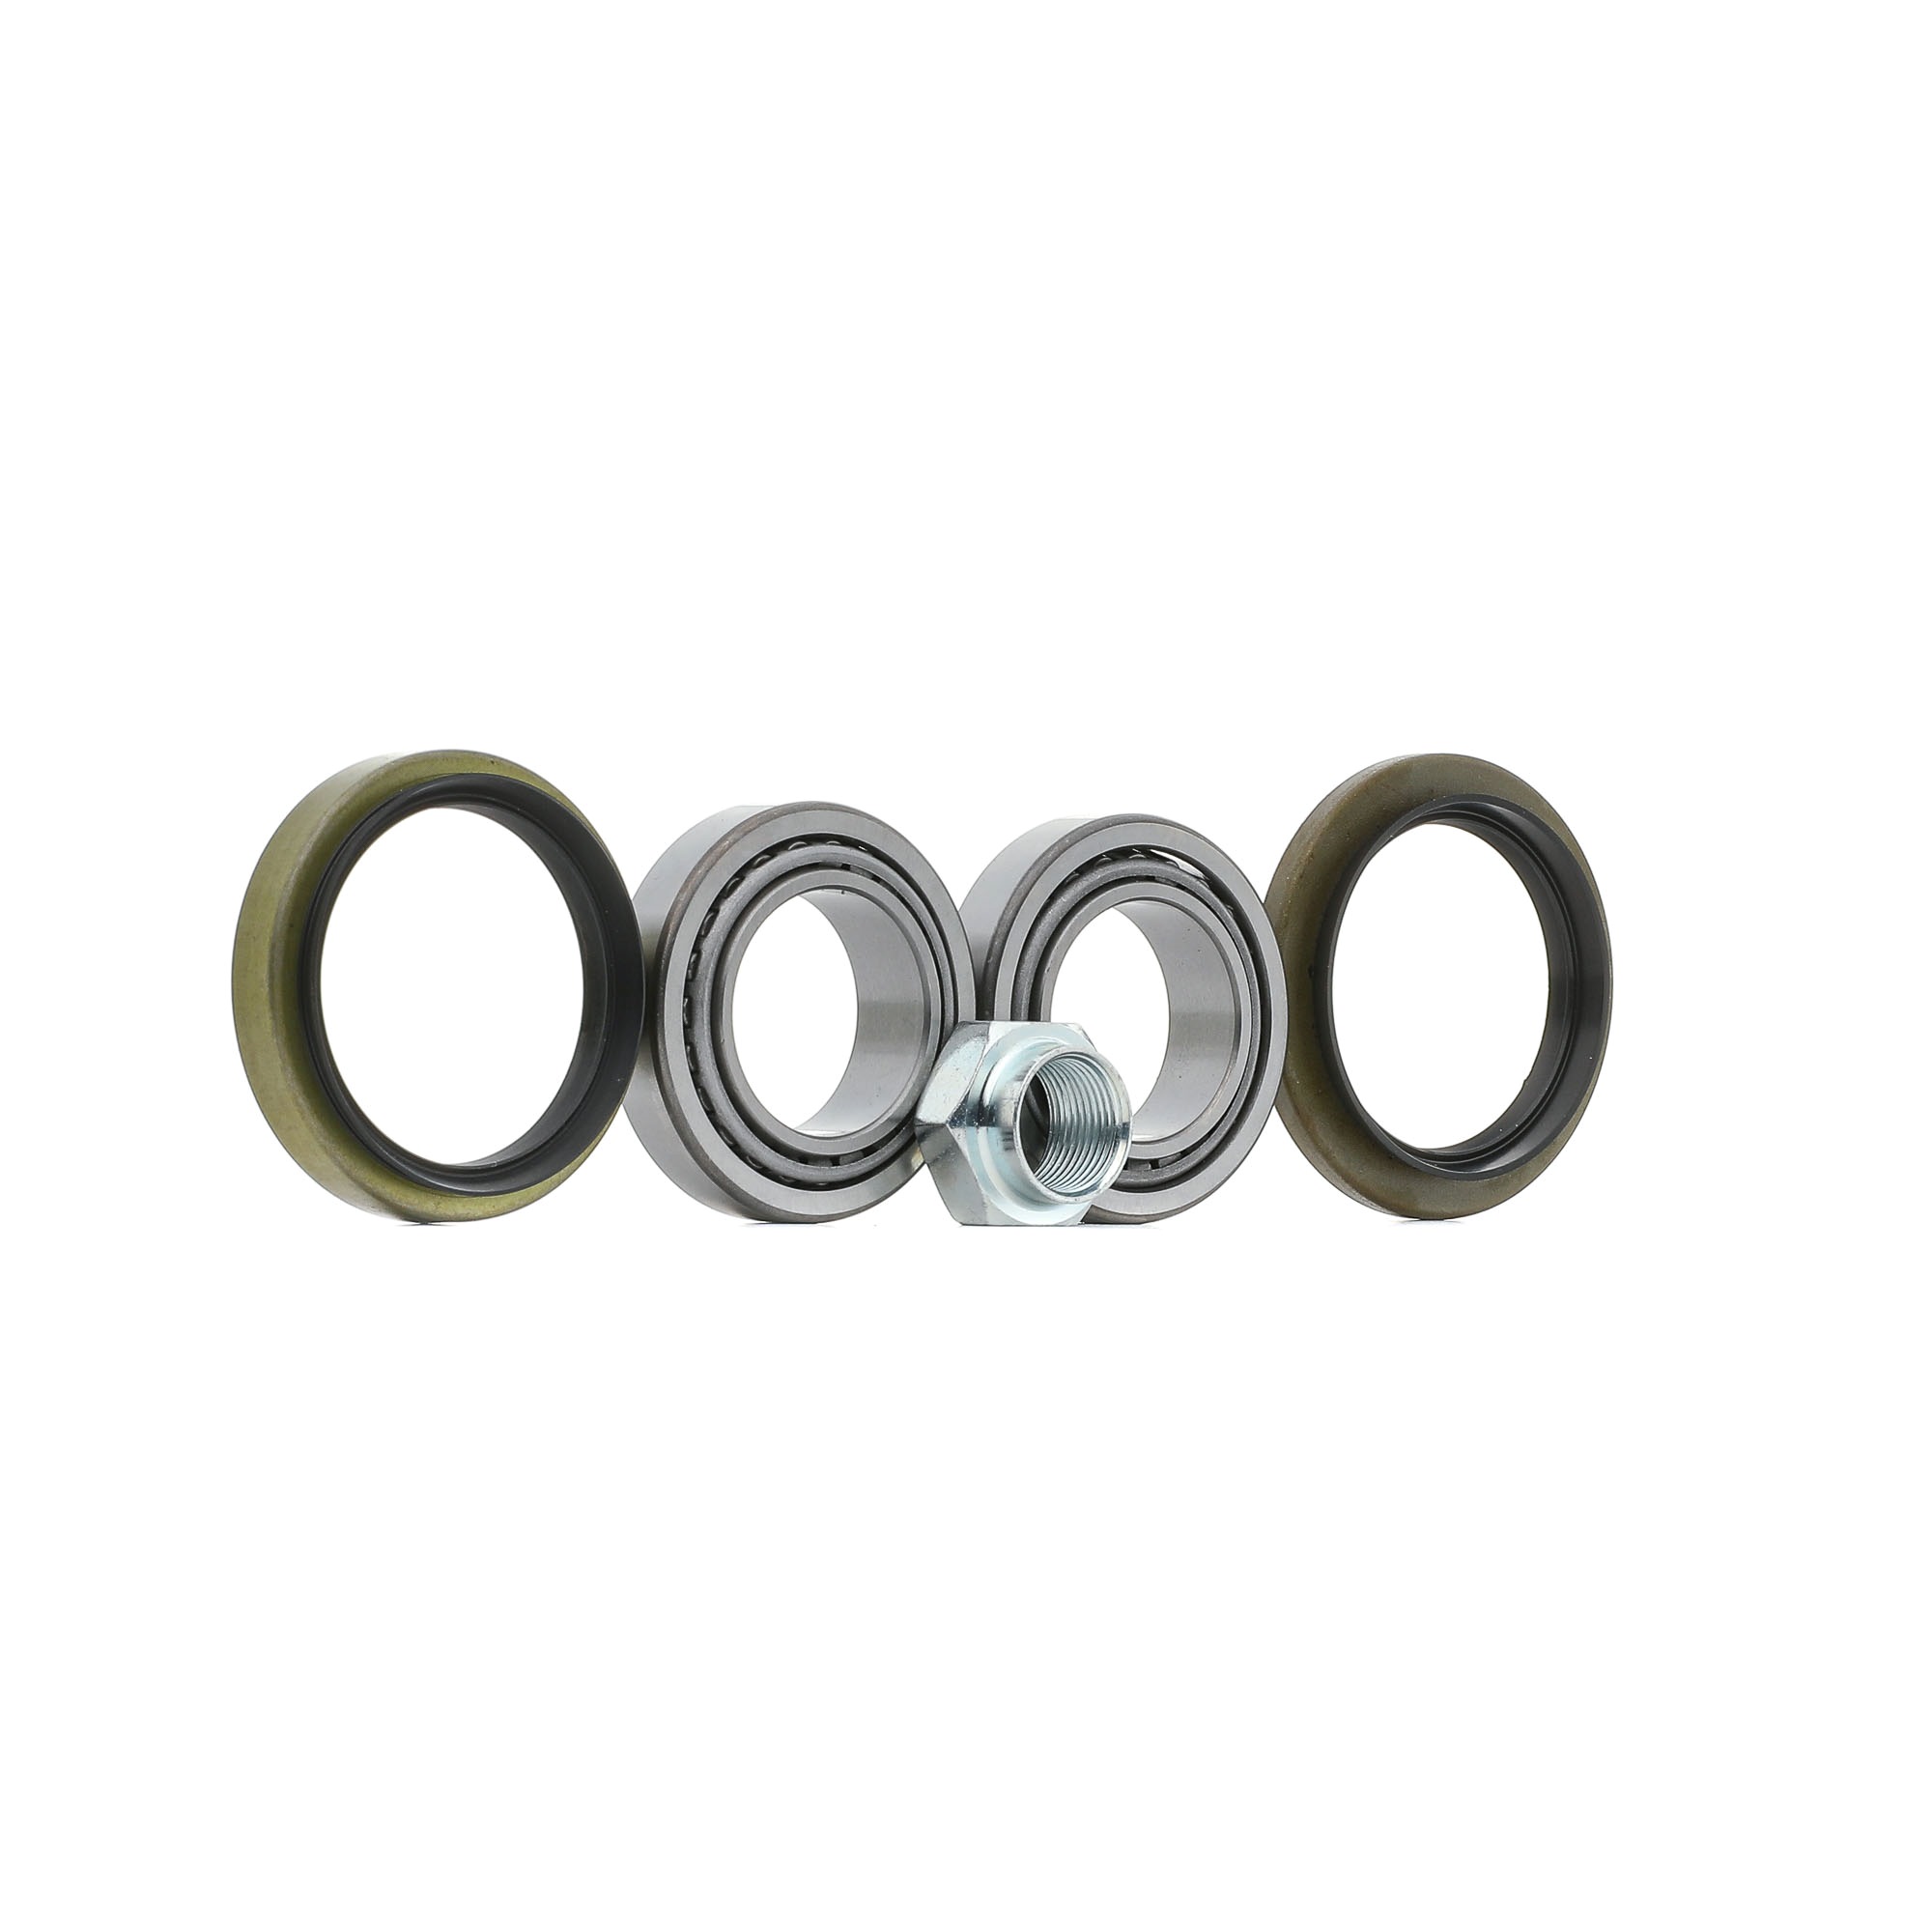 STARK SKWB-0180883 Wheel bearing kit Front axle both sides, with attachment material, 60 mm